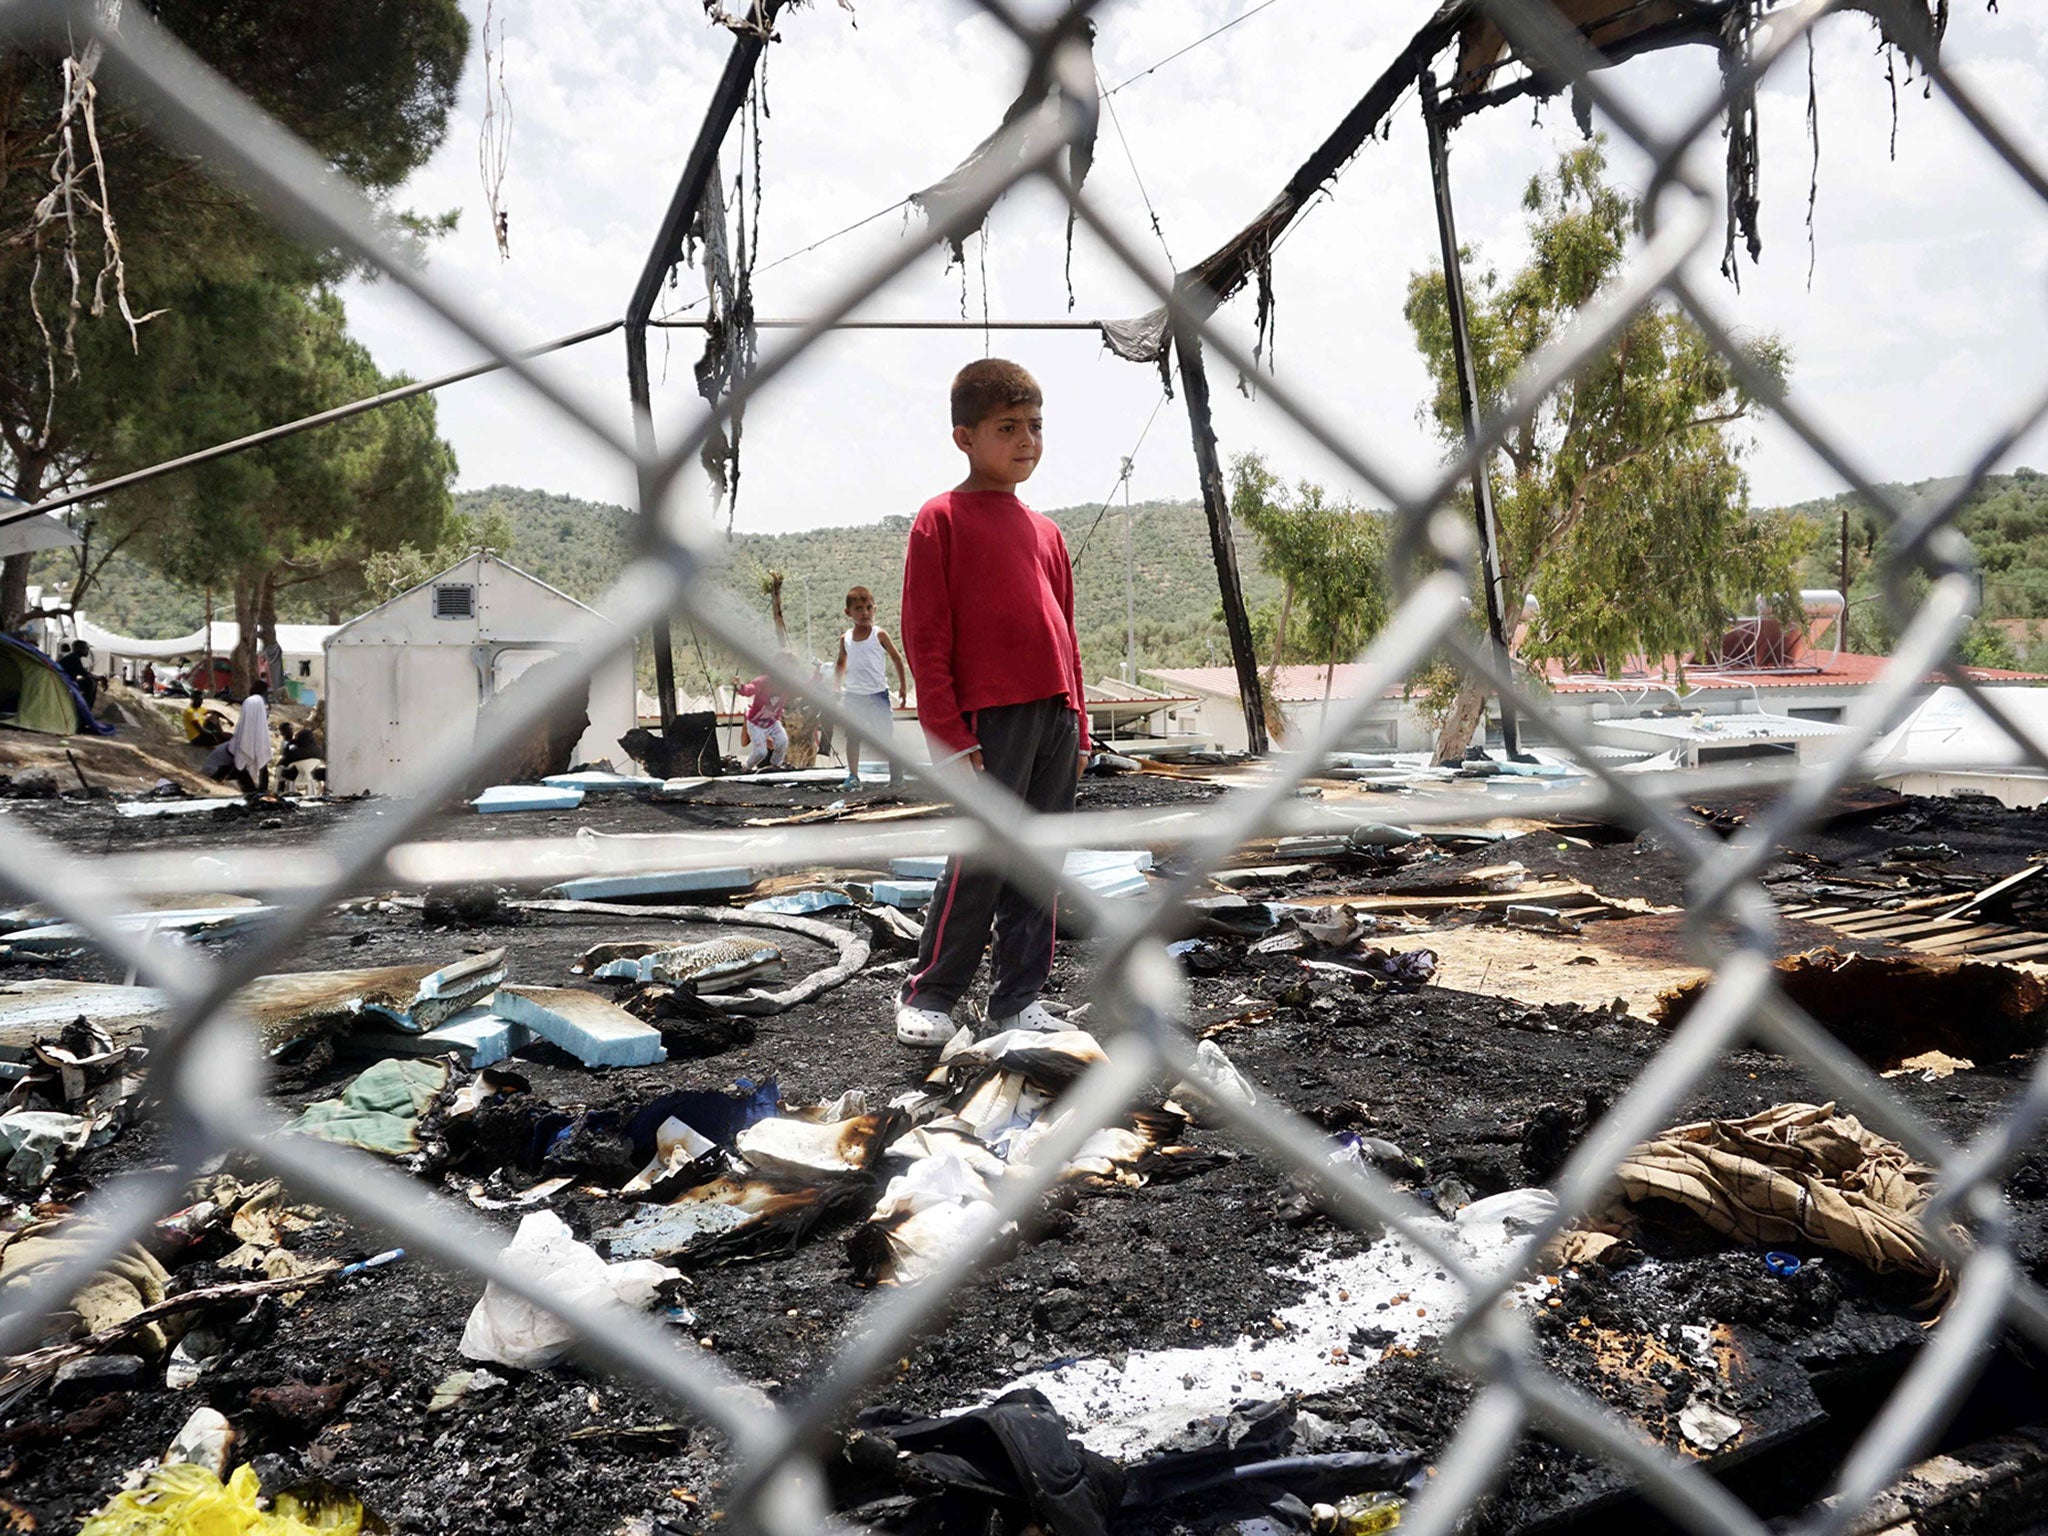 Clashes and a huge fire broke out at the Moria detention camp on the Greek island of Lesbos, leaving tents torched